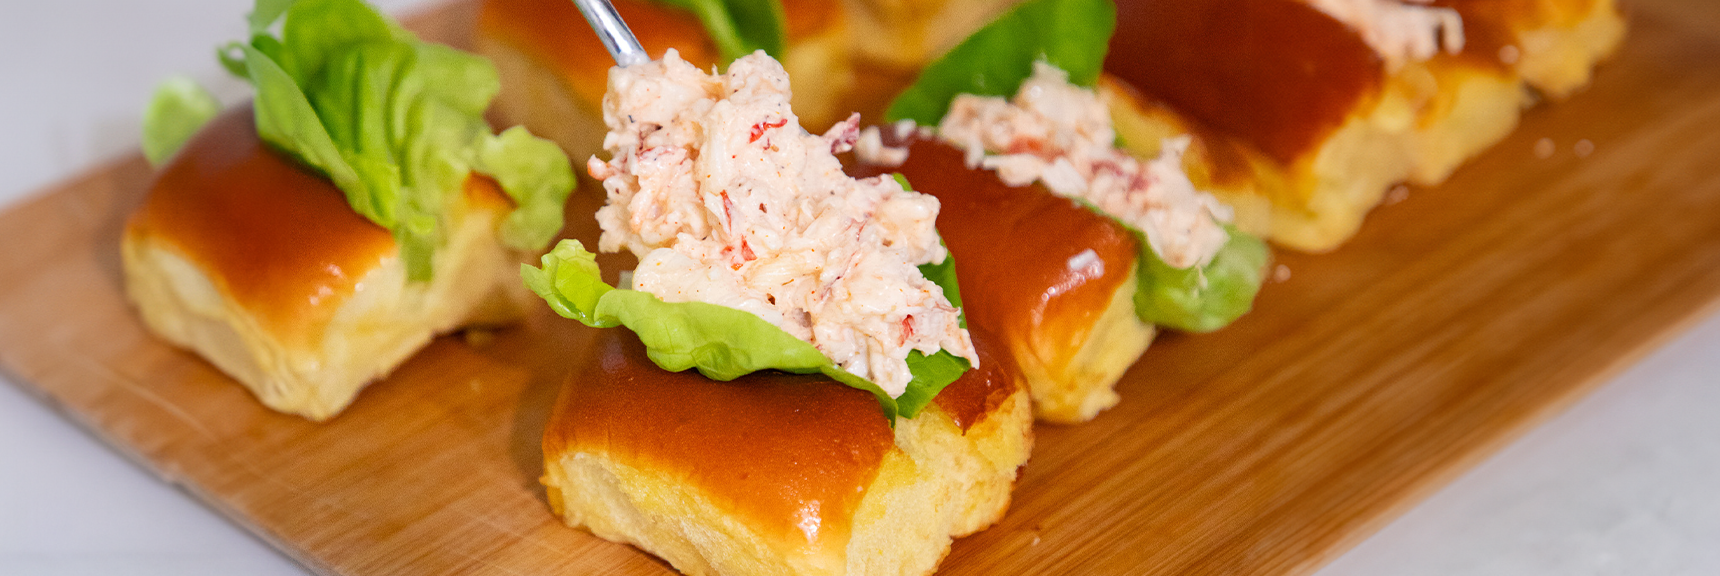 Air-Fried Maine Lobster Rolls recipe image